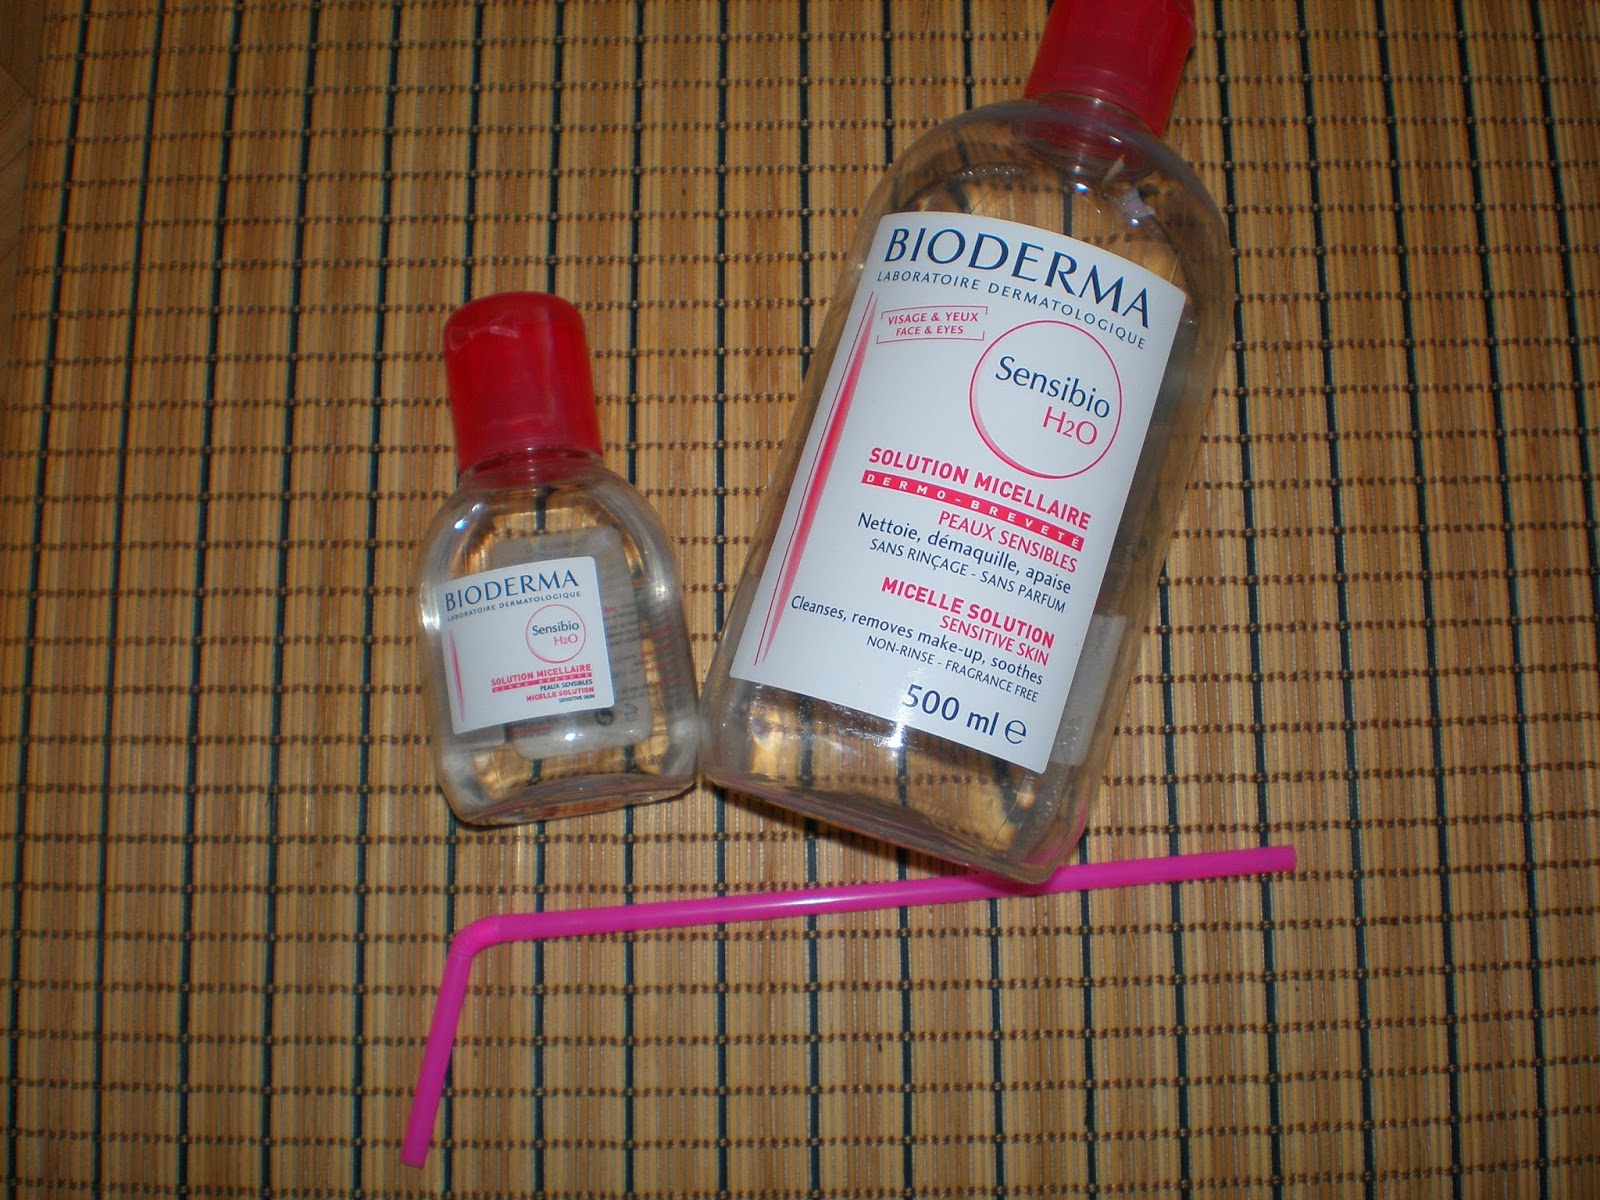 Large and small bottle of Bioderma and a straw